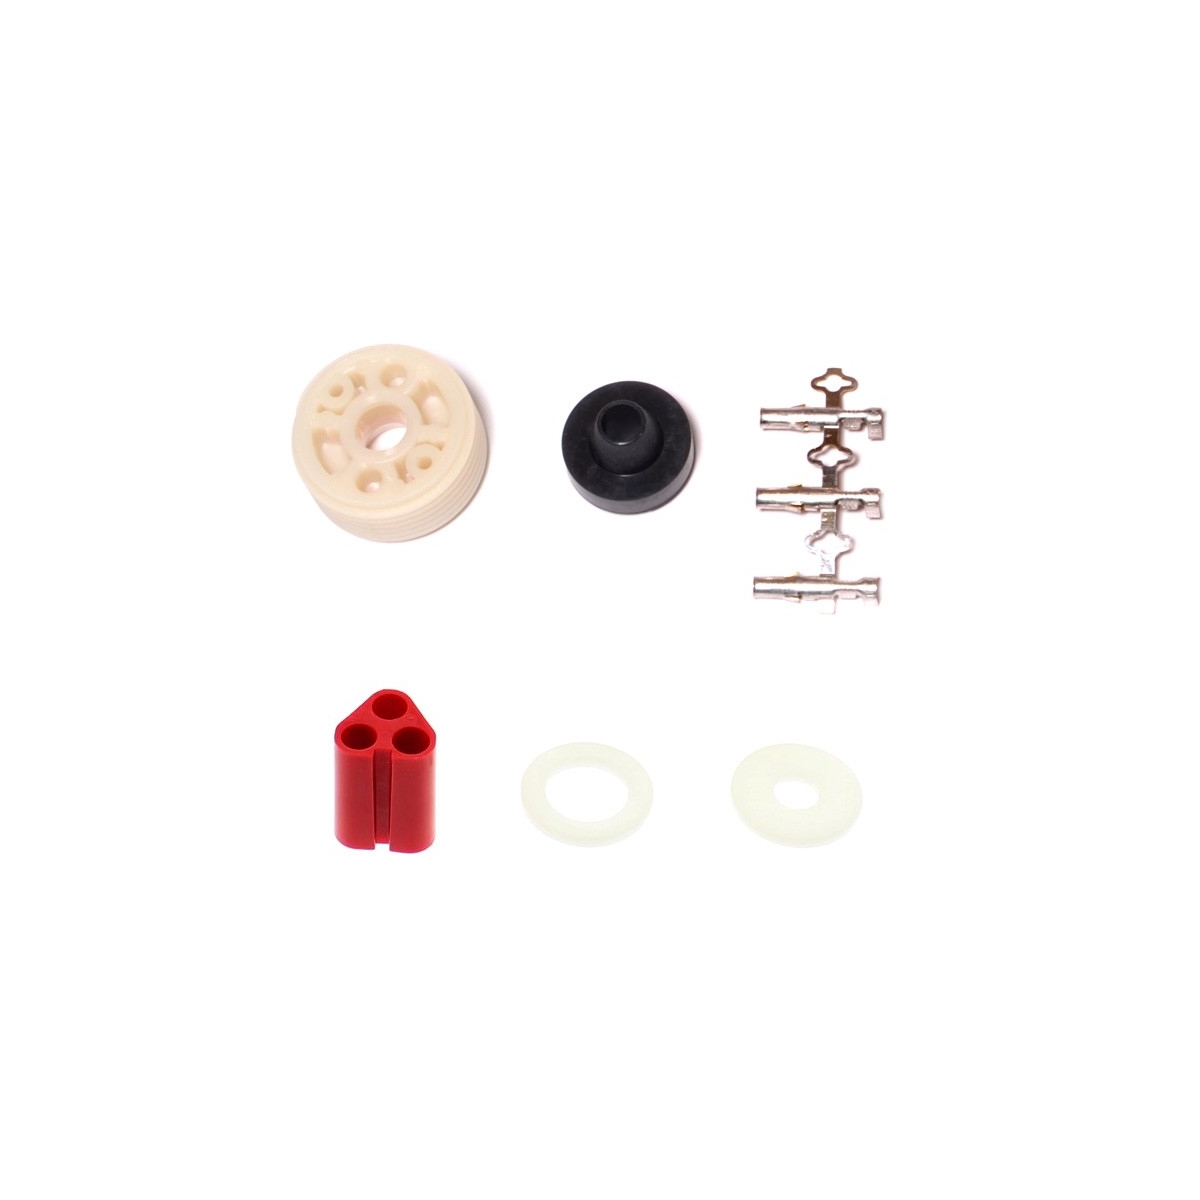 Dolphin motor cable connector kit 9991279